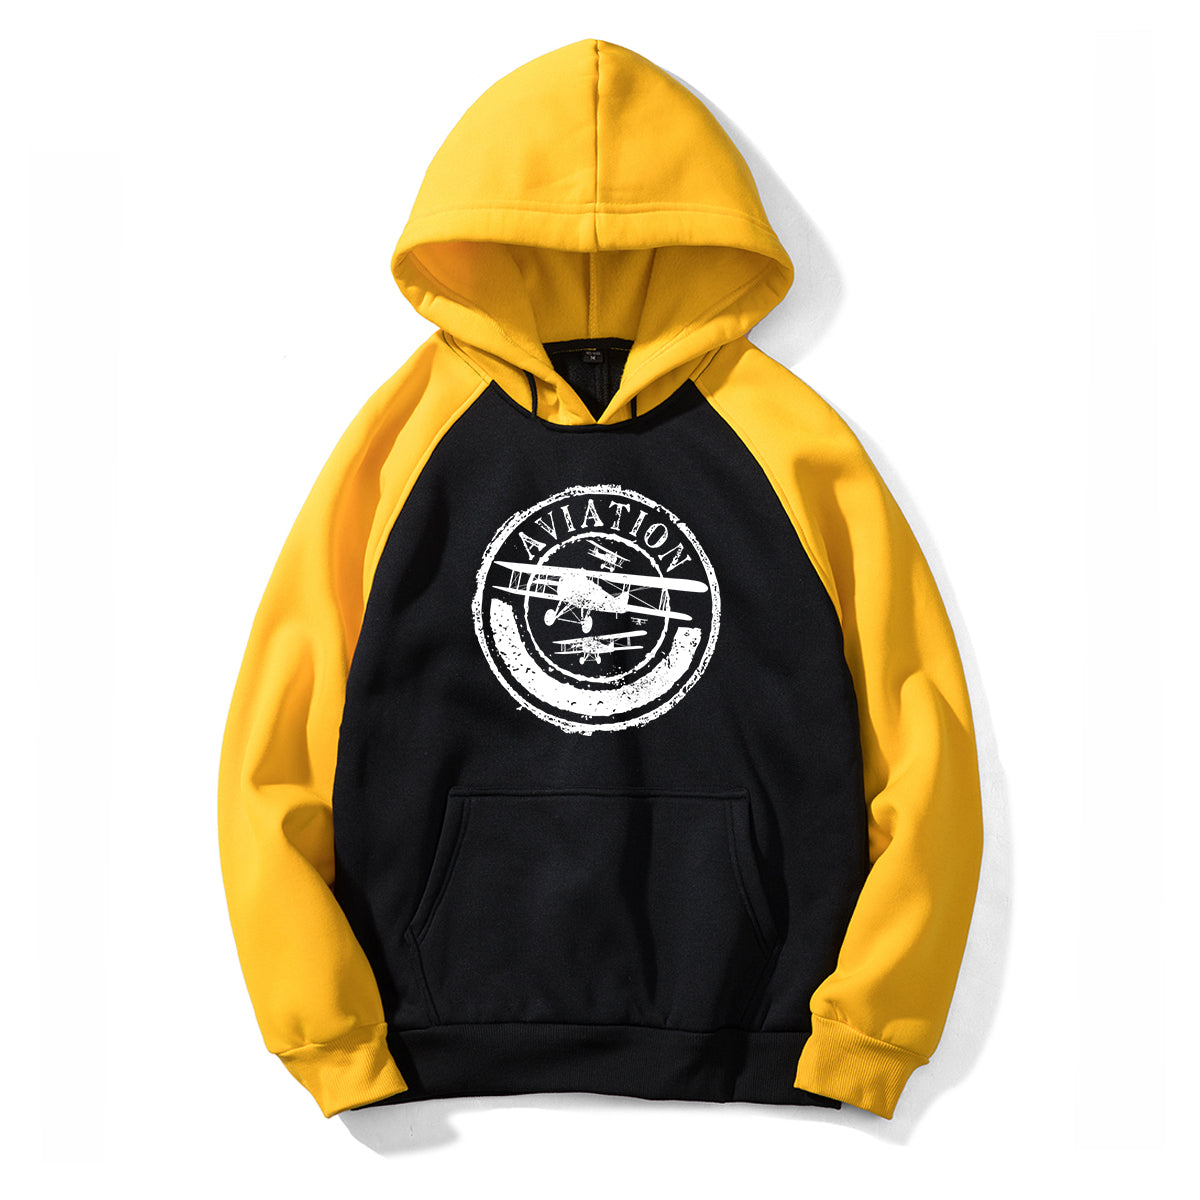 Aviation Lovers Designed Colourful Hoodies